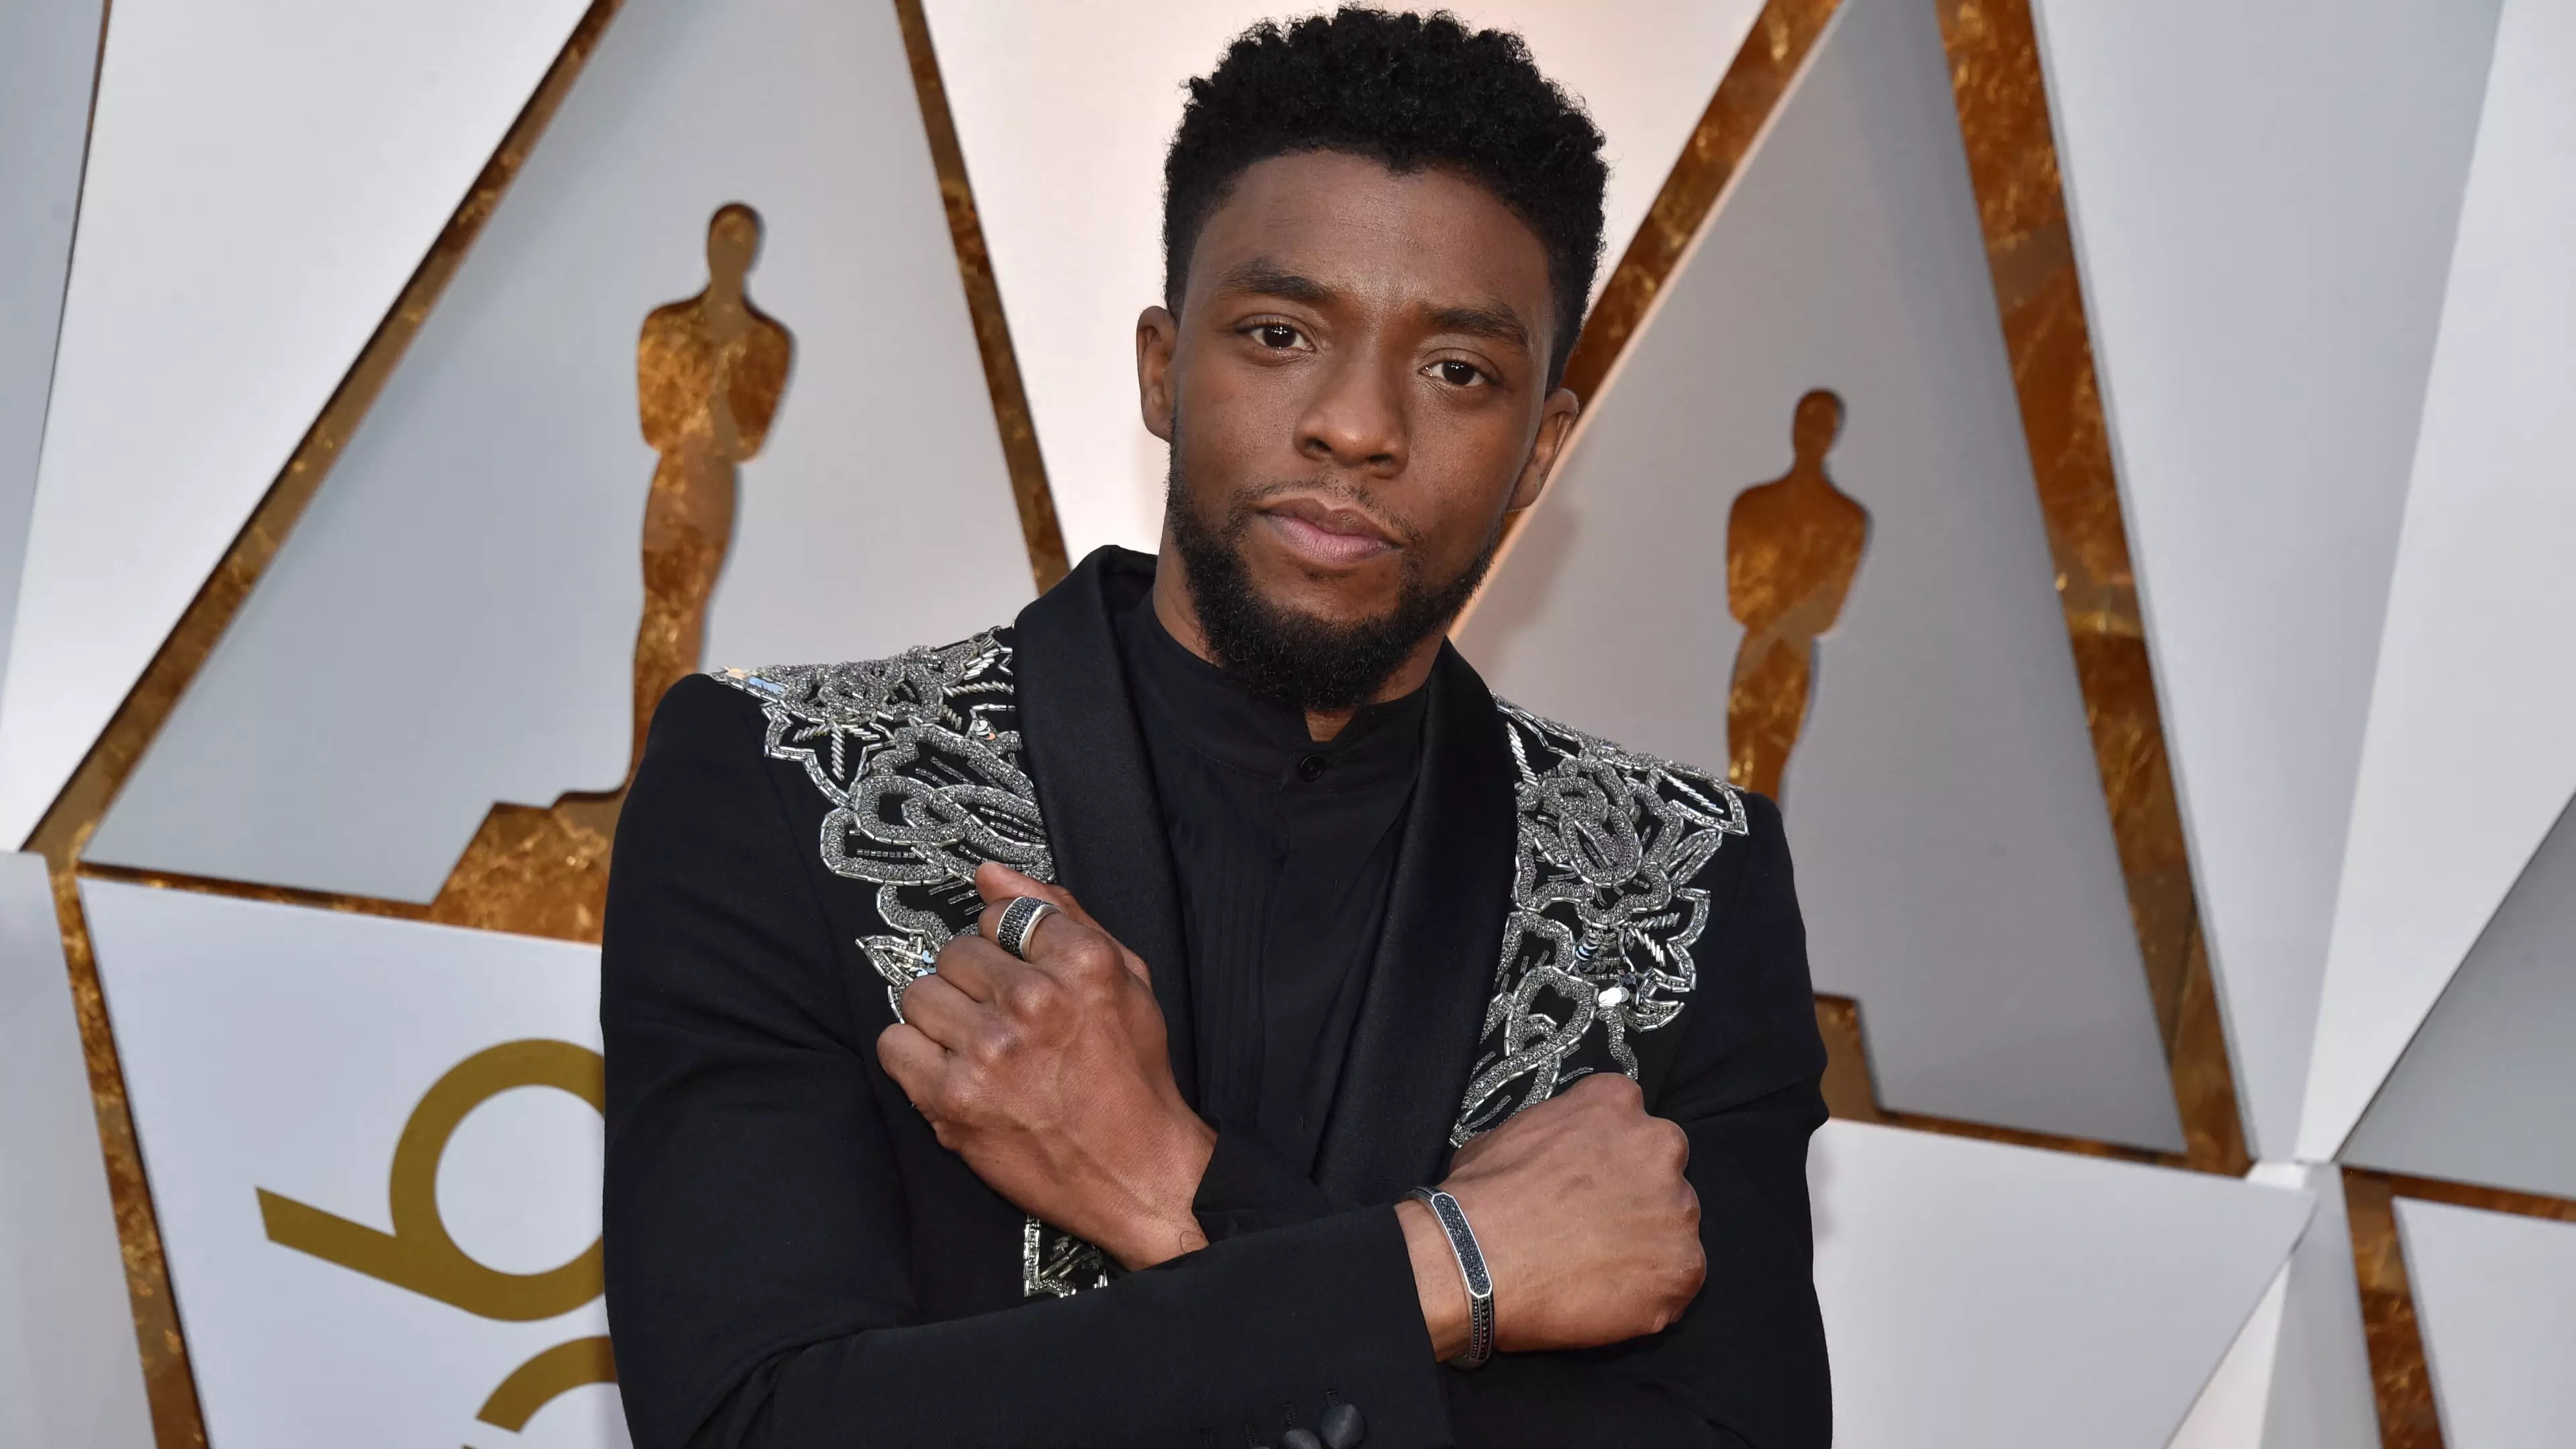 Final Tweet From Chadwick Boseman's Account Is Most Liked Ever